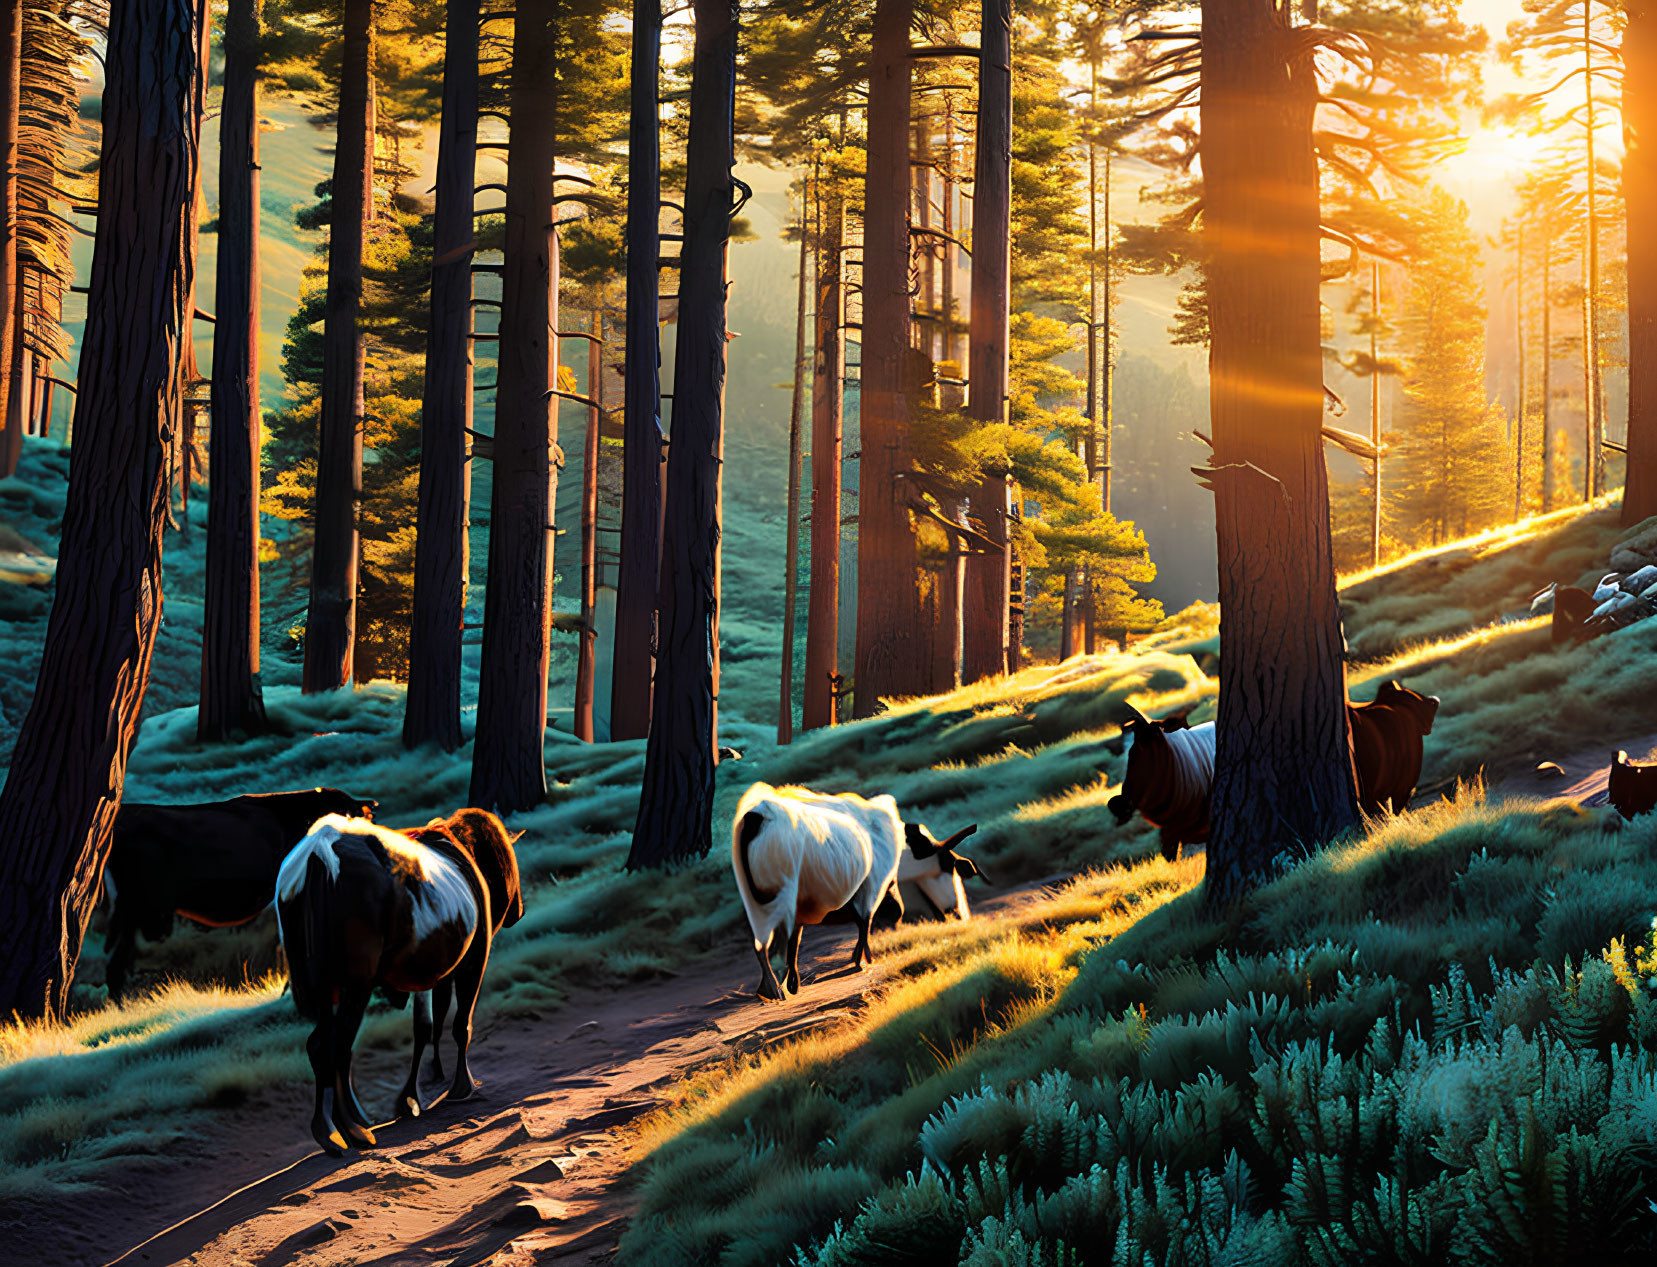 Goats in sunlit forest with tall pines and lush grass